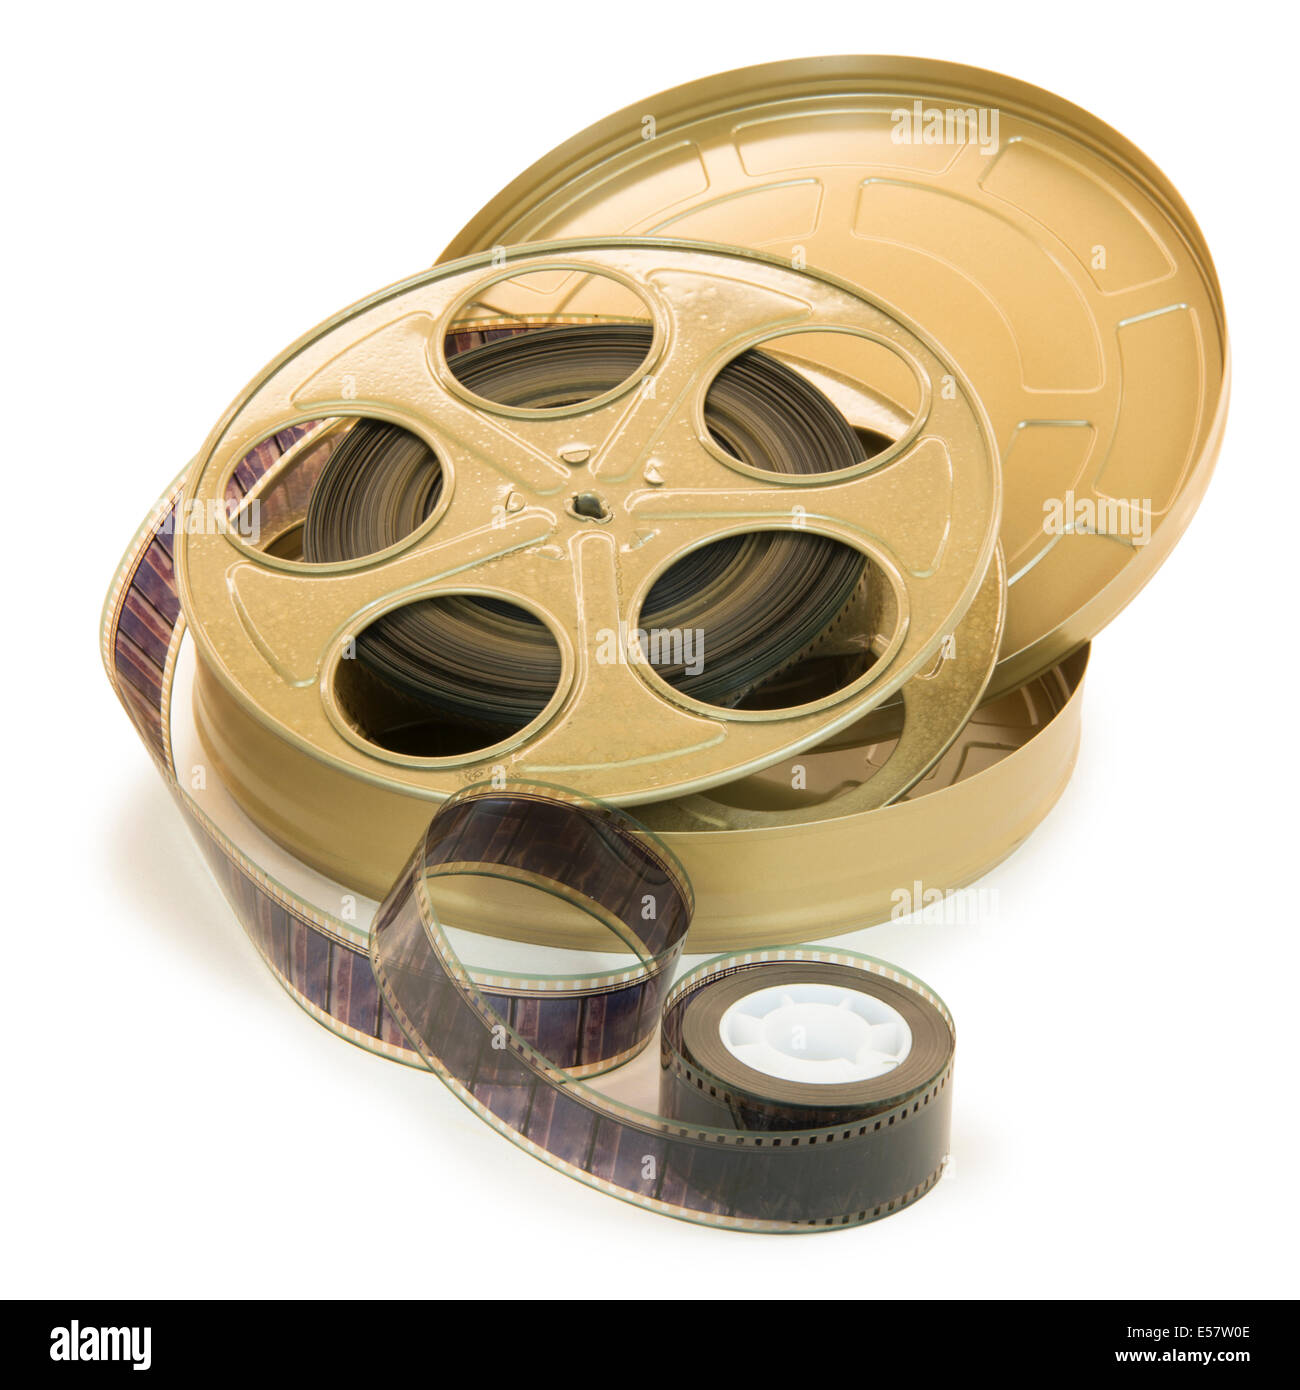 A 35mm film in a metallic golden reel and its can, isolated over